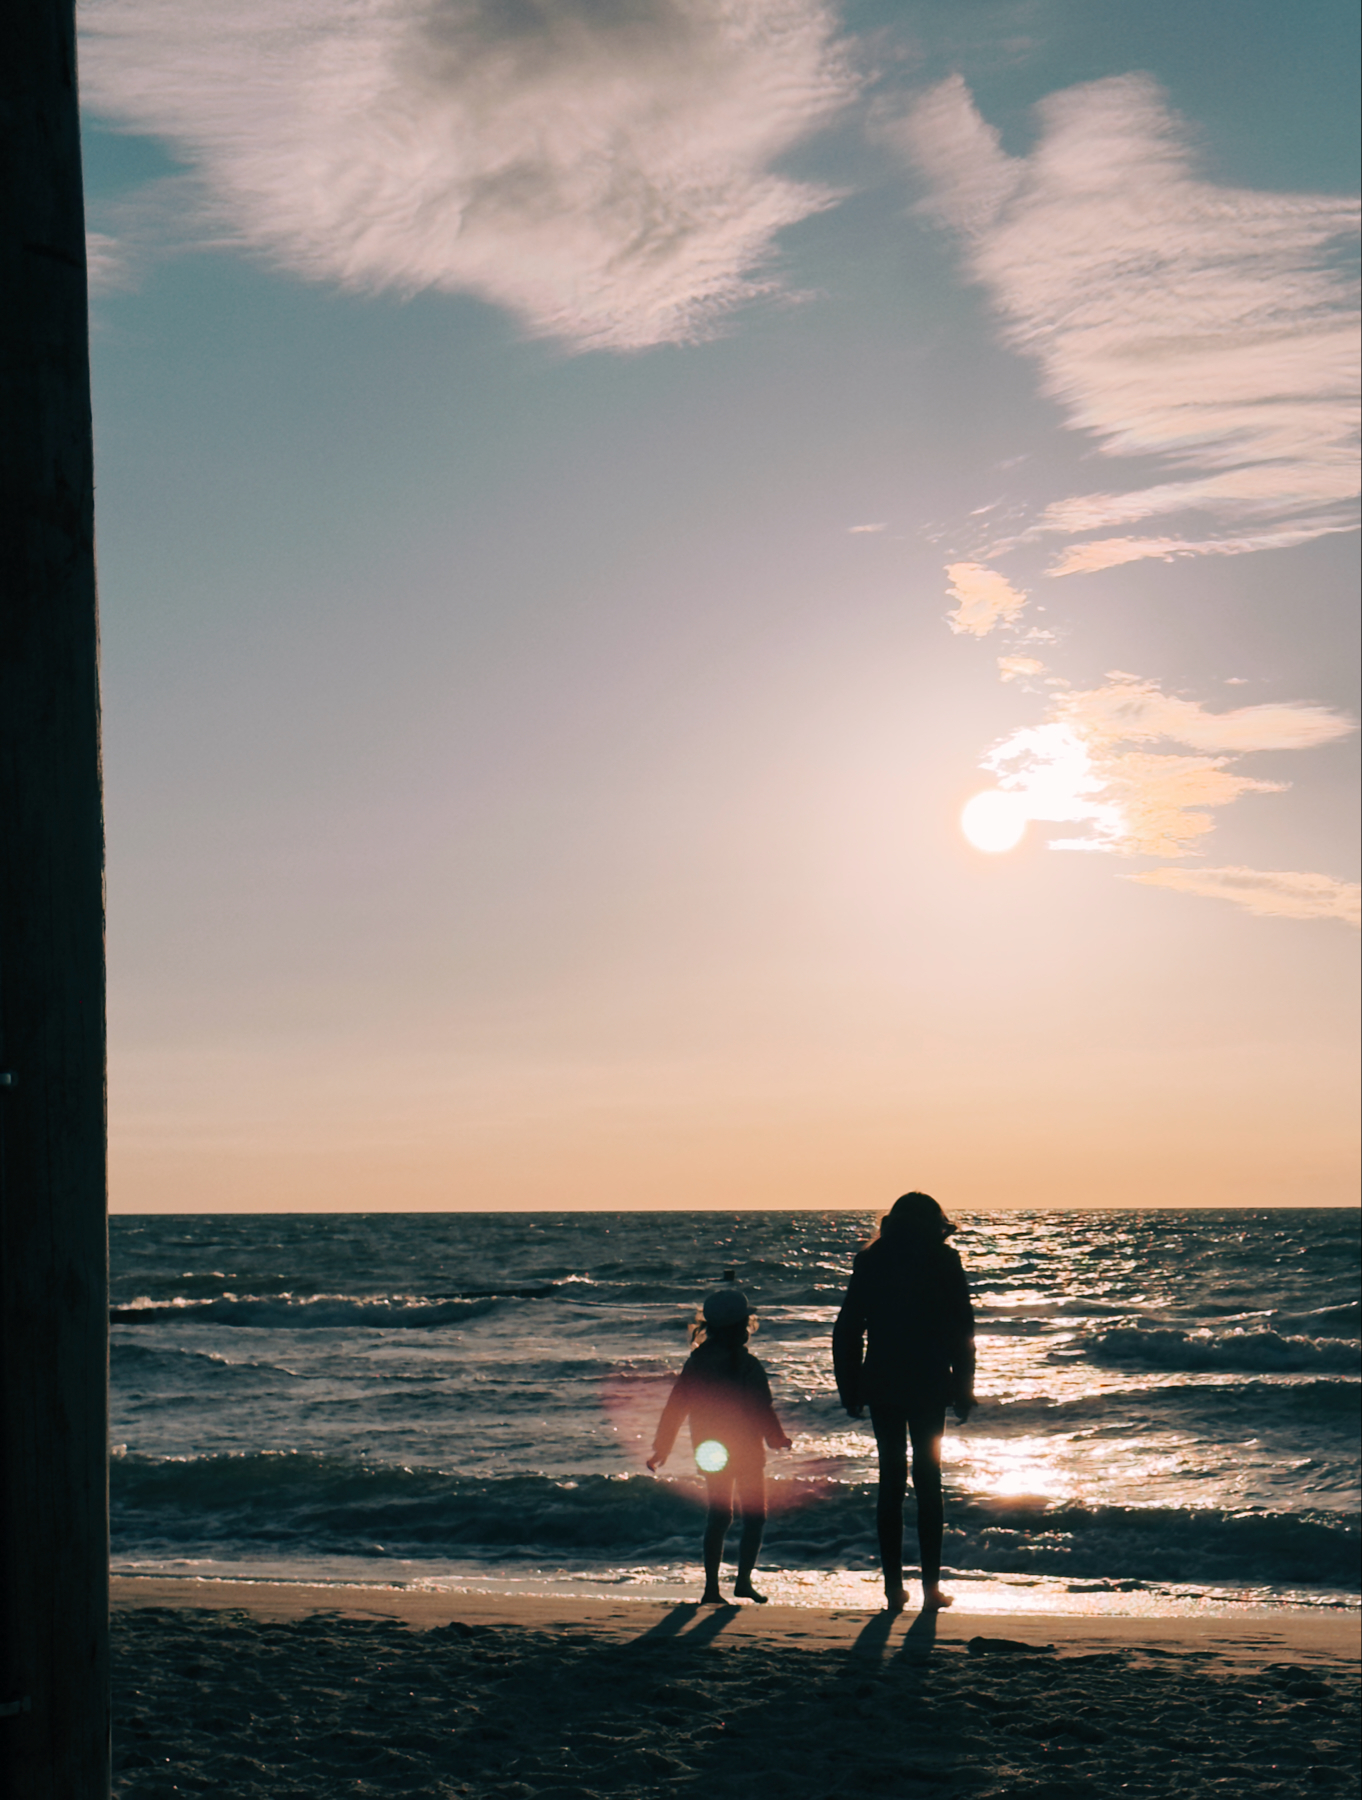 Silhouettes of two people, one of them a child, standing on a beach at sunset, with the ocean and sun in the background. The sky is partly cloudy, and their shadows stretch across the sand.